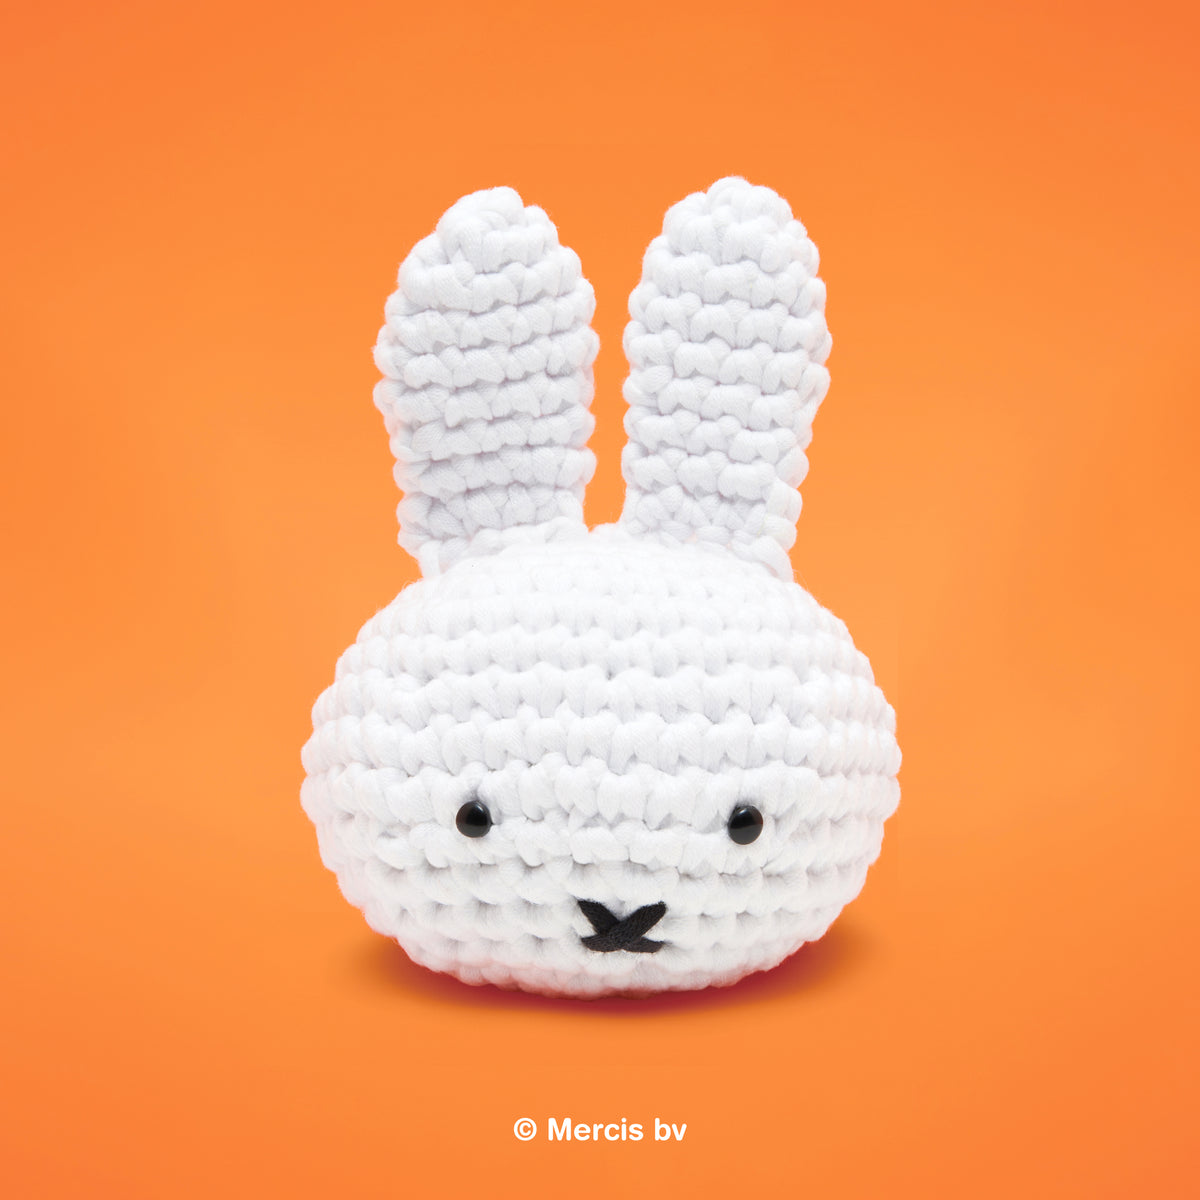 Kids Can Crochet Miffy the Bunny with New Woobles Kits - The Toy Insider